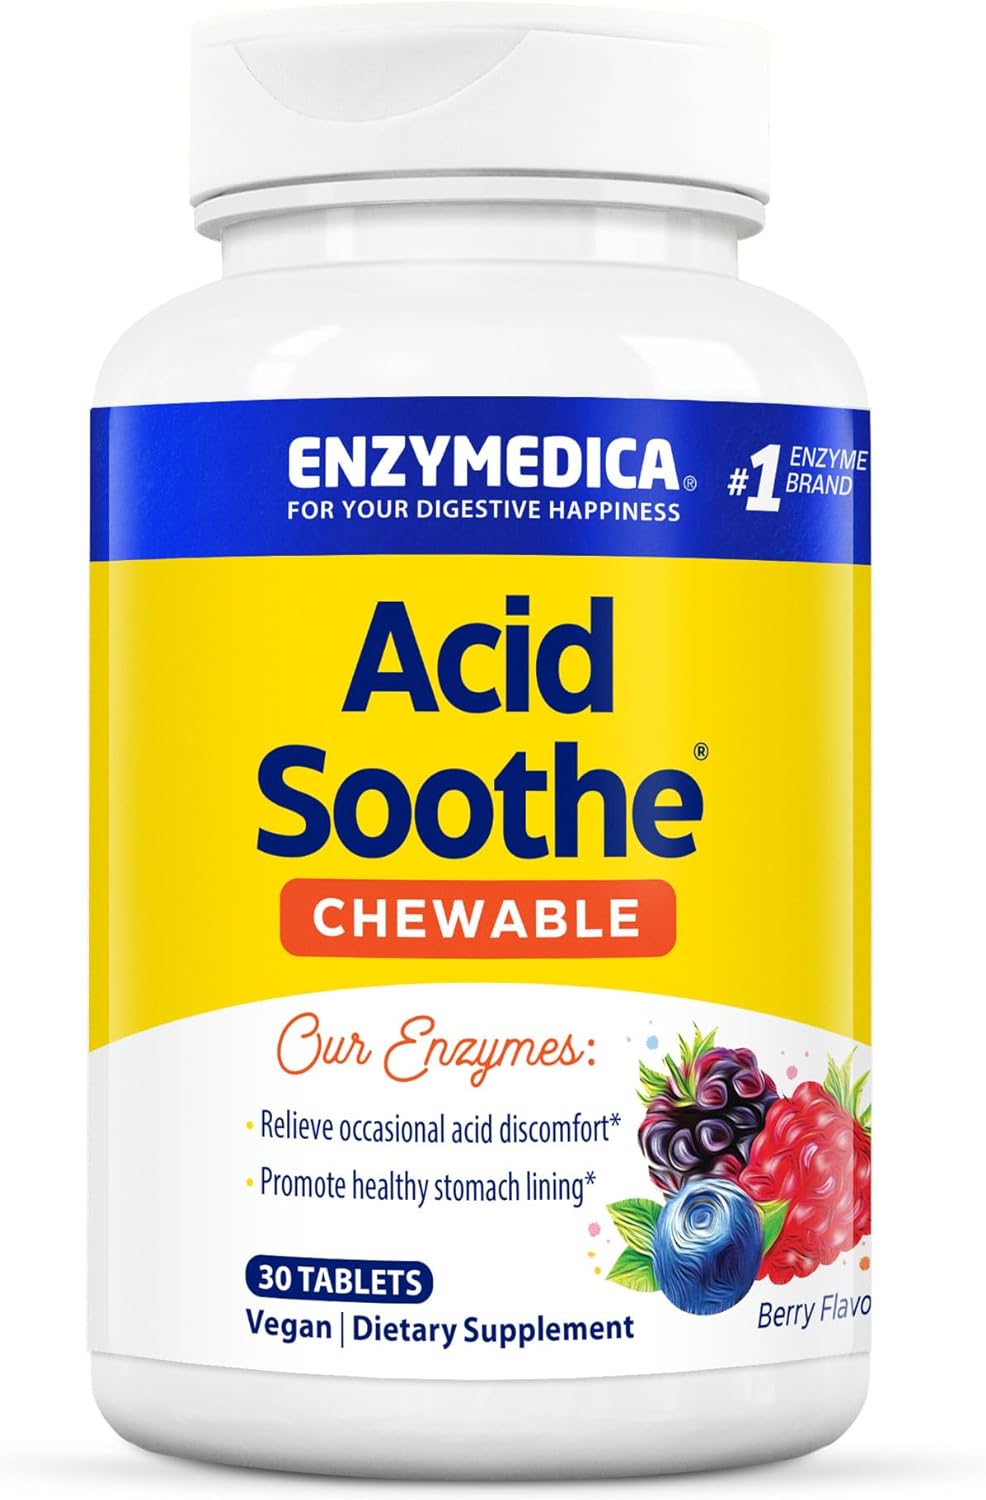 Enzymedica - Chewable Acid Soothe, Supports the Relief of Occasional Heartburn + Indigestion, 30 count